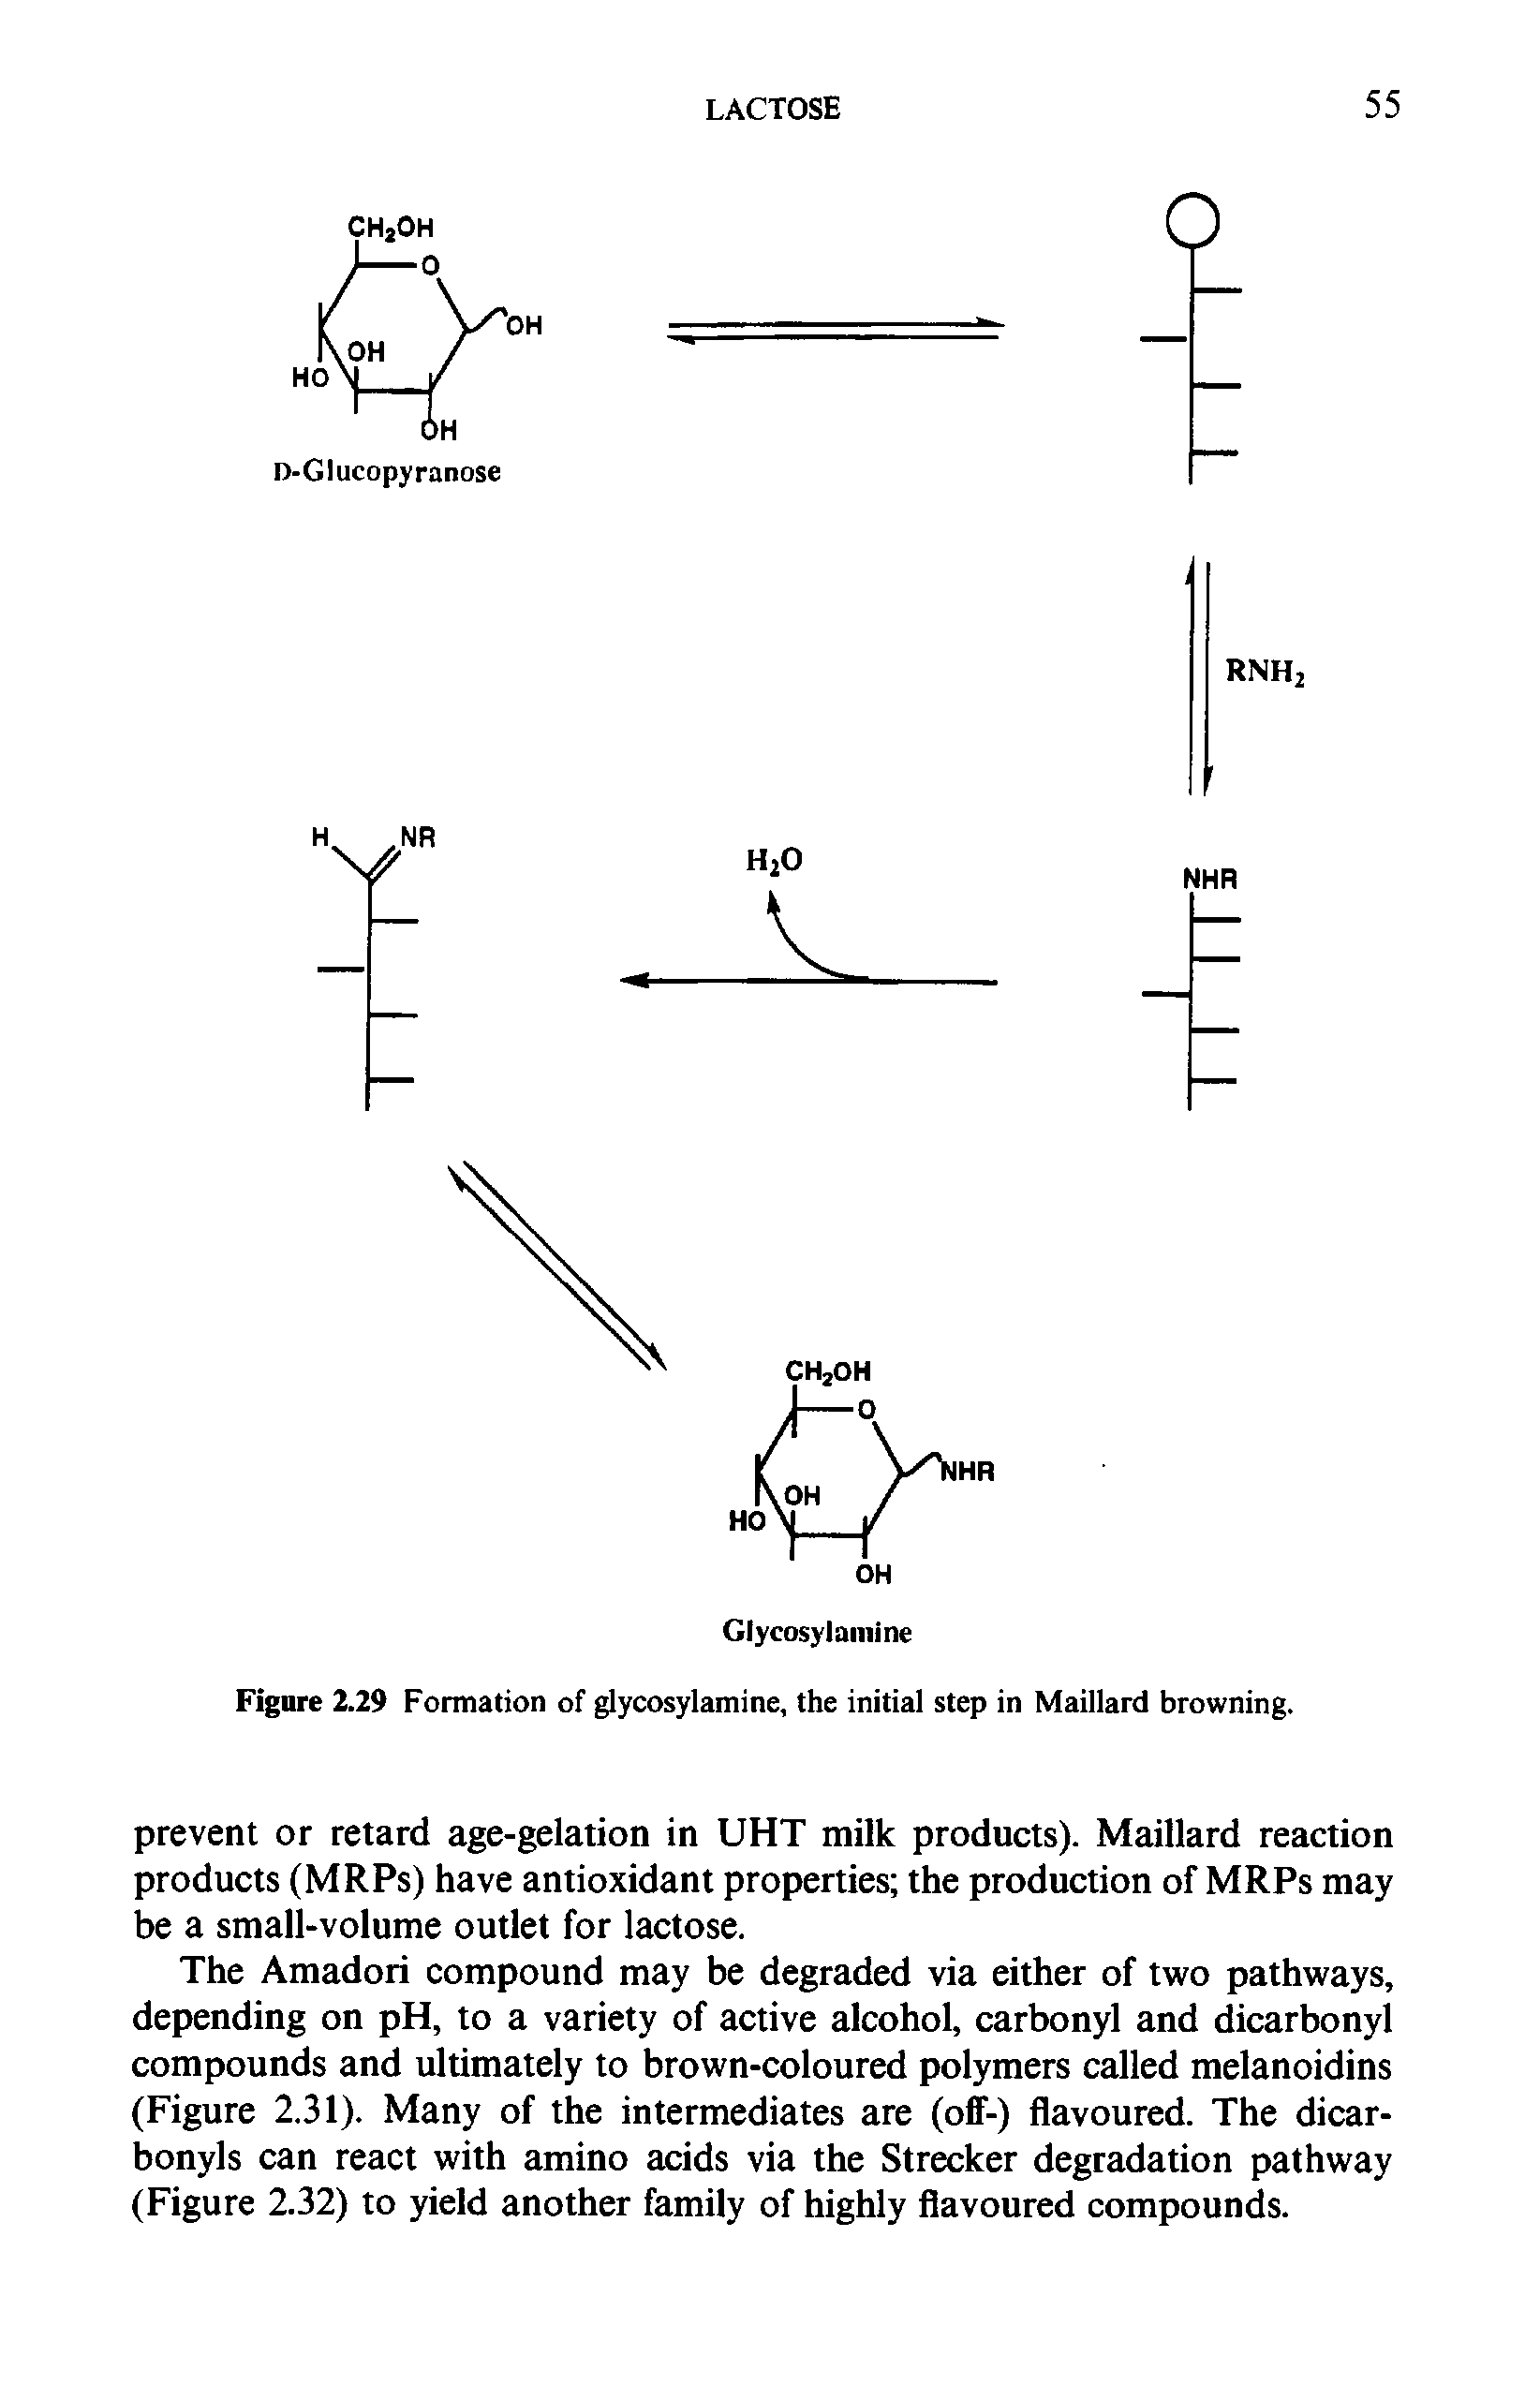 Figure 2.29 Formation of glycosylamine, the initial step in Maillard browning.